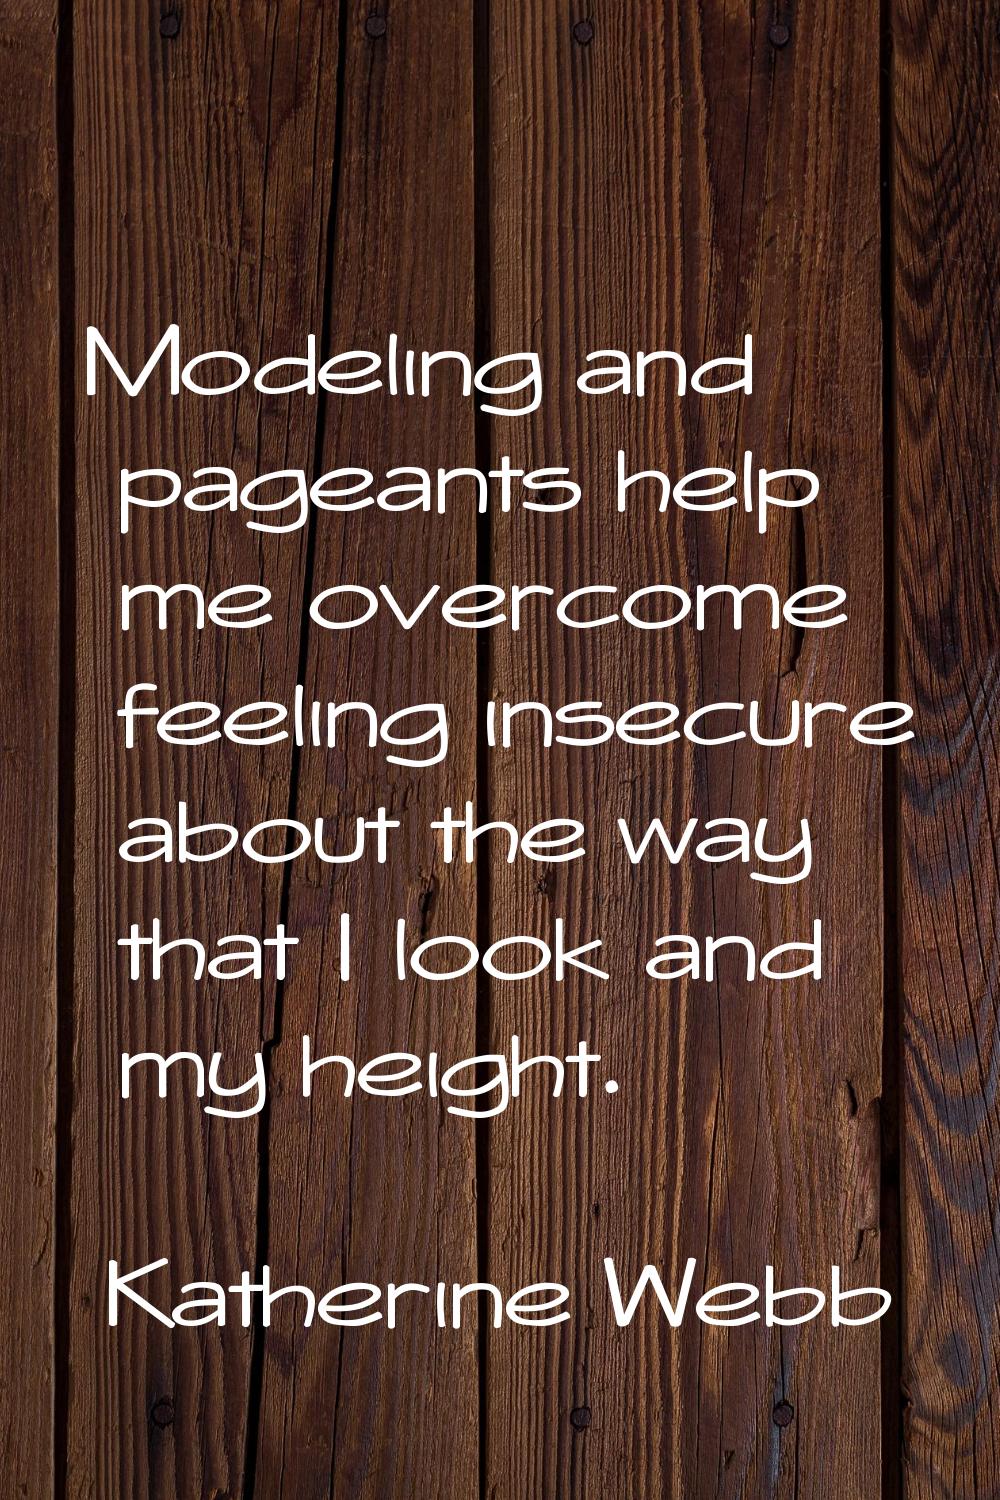 Modeling and pageants help me overcome feeling insecure about the way that I look and my height.